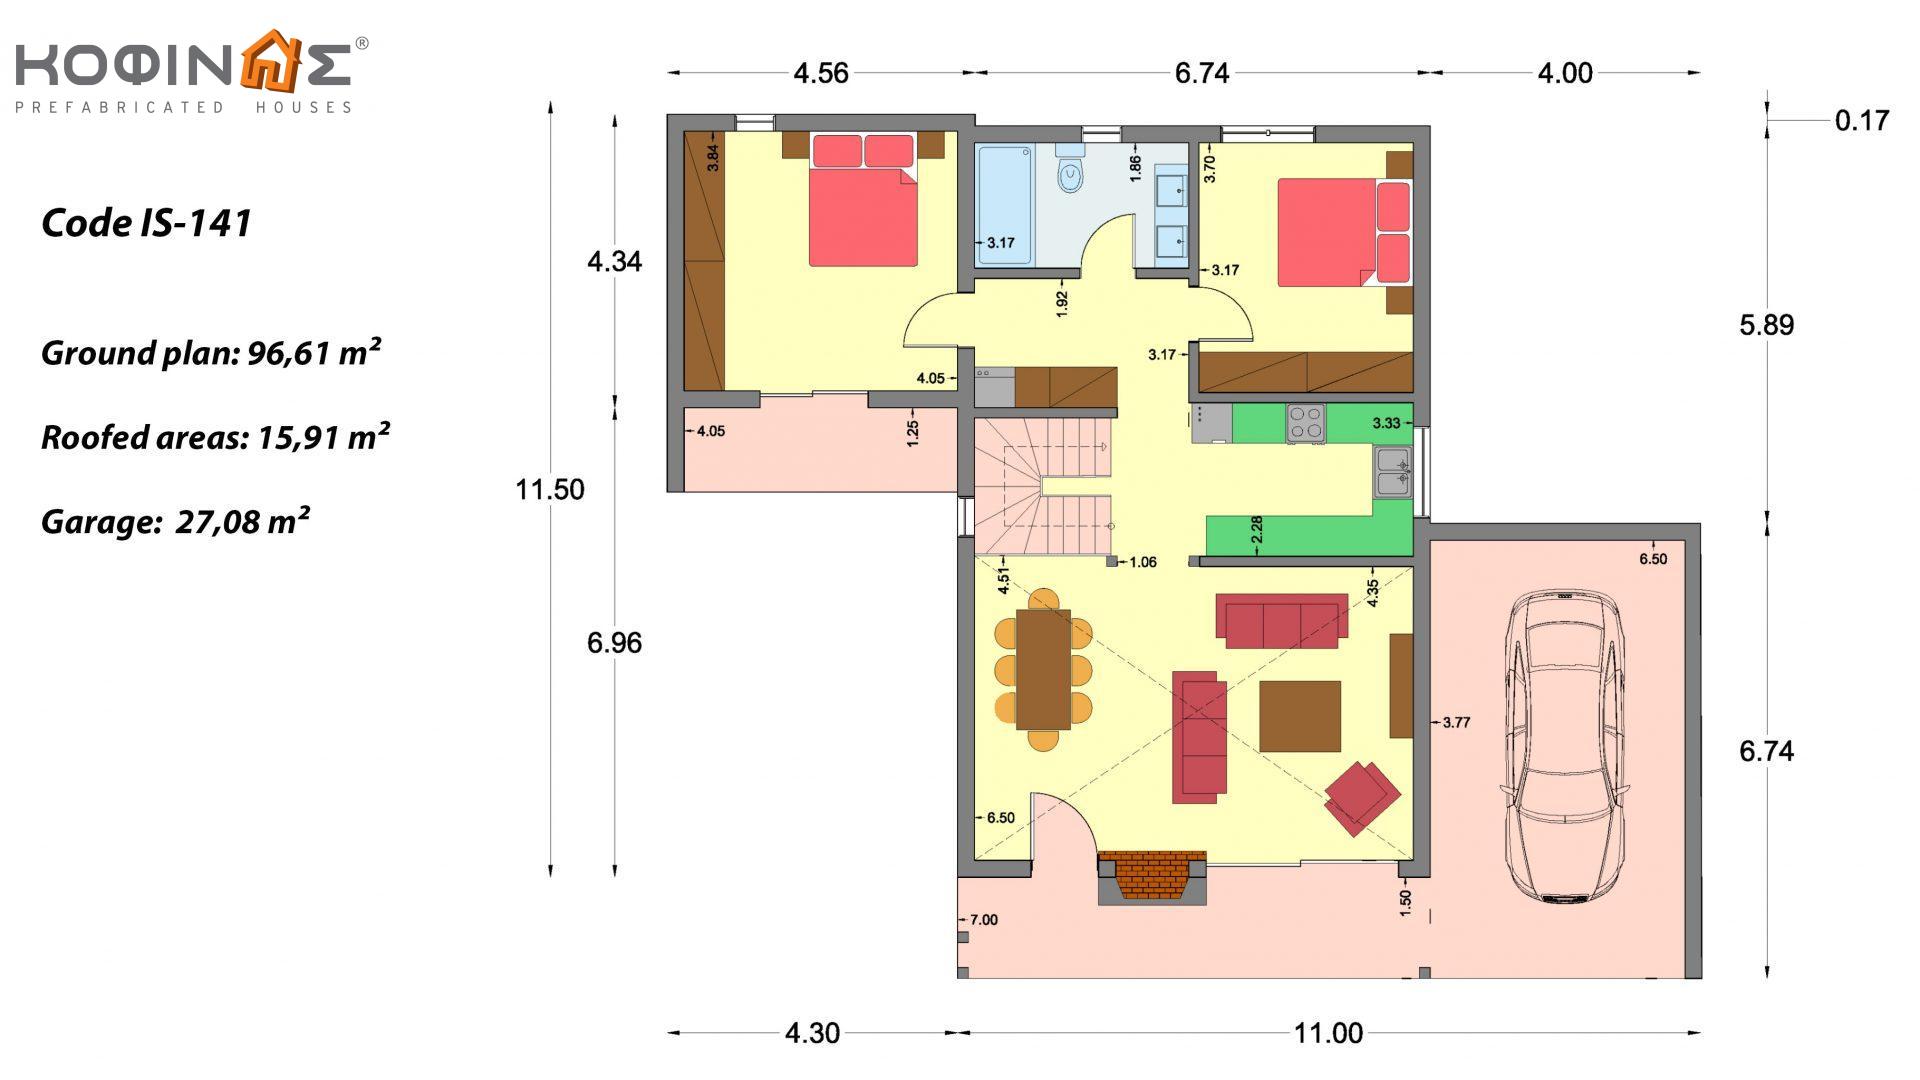 1-story house with attic IS-141, total surface of 141,95 m² , +Garage 27.08 m²(=169.03 m²), covered roofed areas 15.91 m²